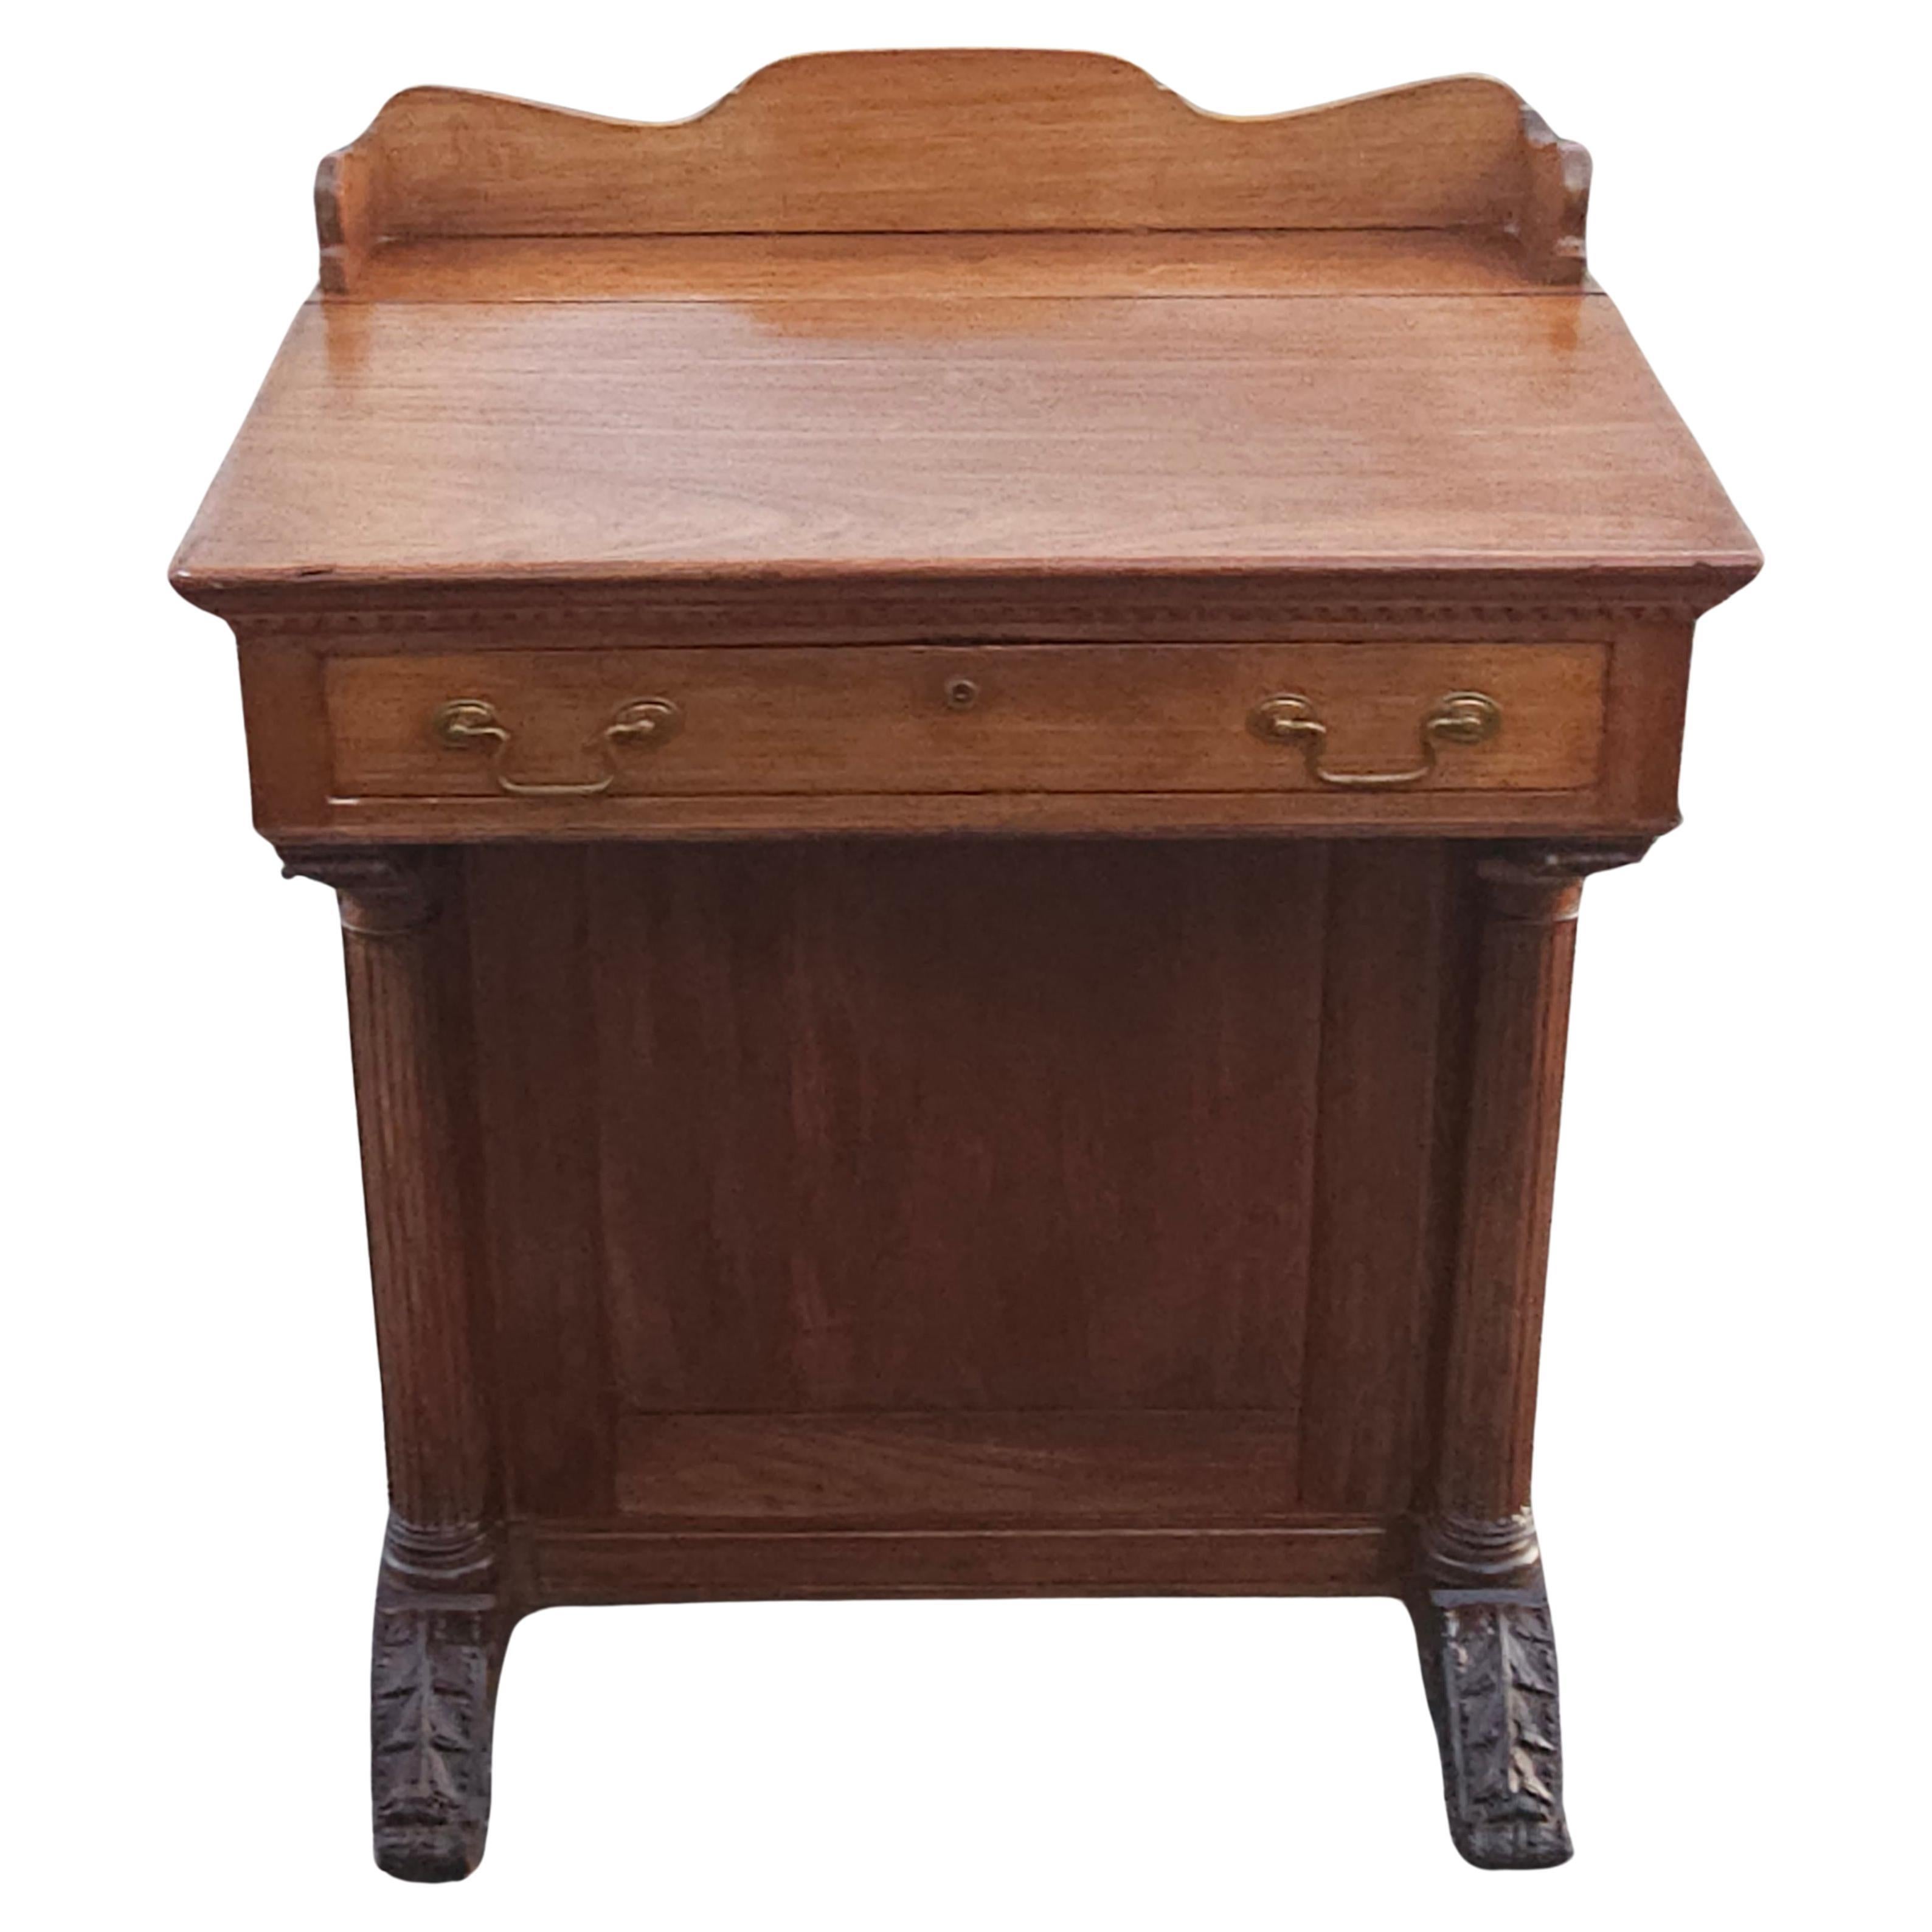 A 19th Century Victorian 5 drawer Davenport Desk with large storage cabinet. Features 2 drawers on left side and 2 drawers on right side, a large two doors storage cabinet with a door on each side. The front drawer is very large and measures 22